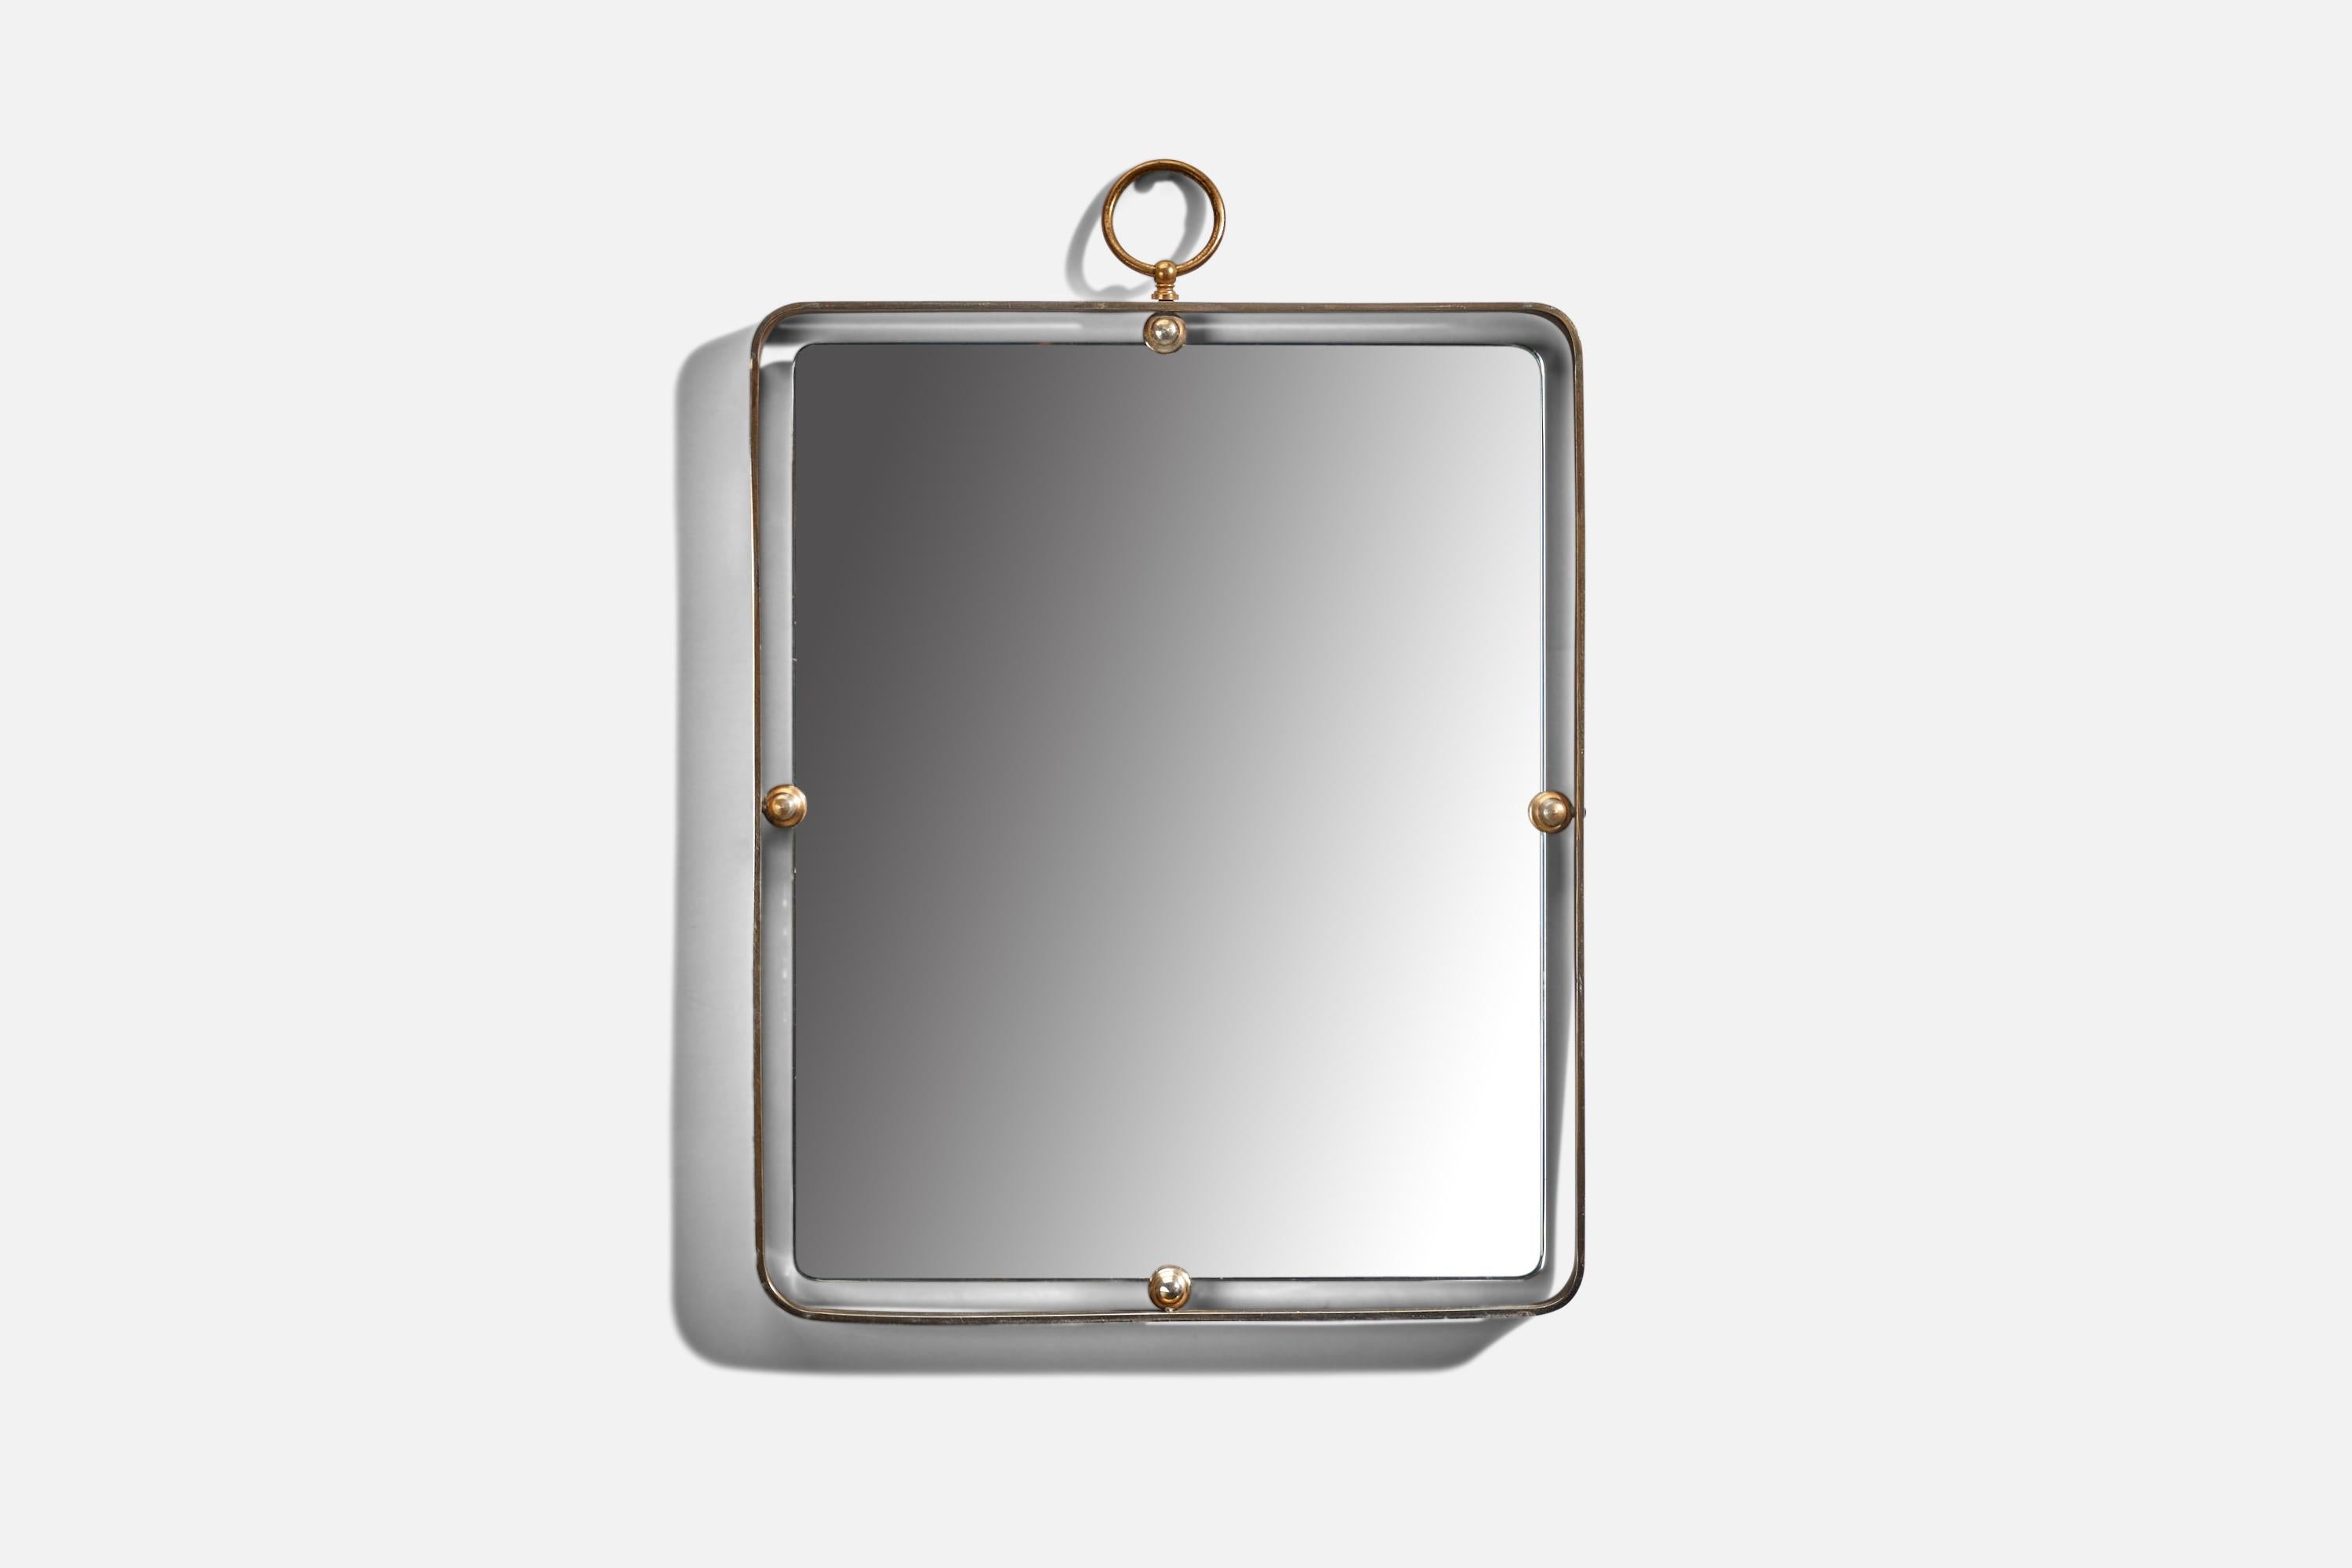 A brass wall mirror; design and production attributed to Fontana Arte, Italy, 1950s.